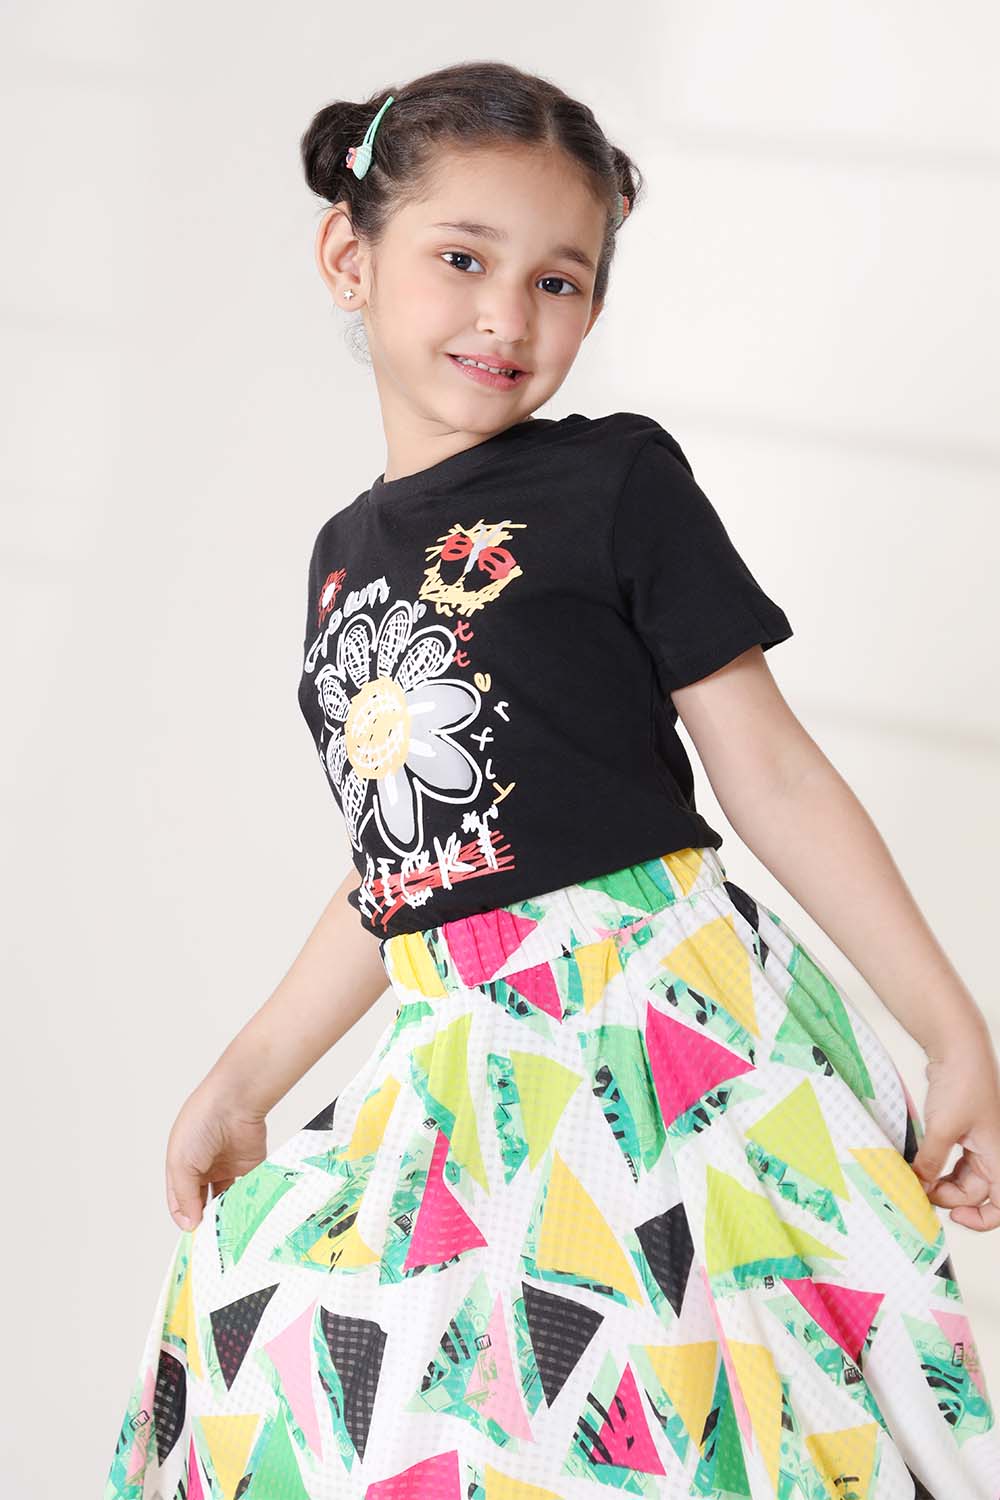 Hope Not Out by Shahid Afridi Girls Knit T-Shirt Doodle Puff Printed Half Sleeve T-Shirt for Girls